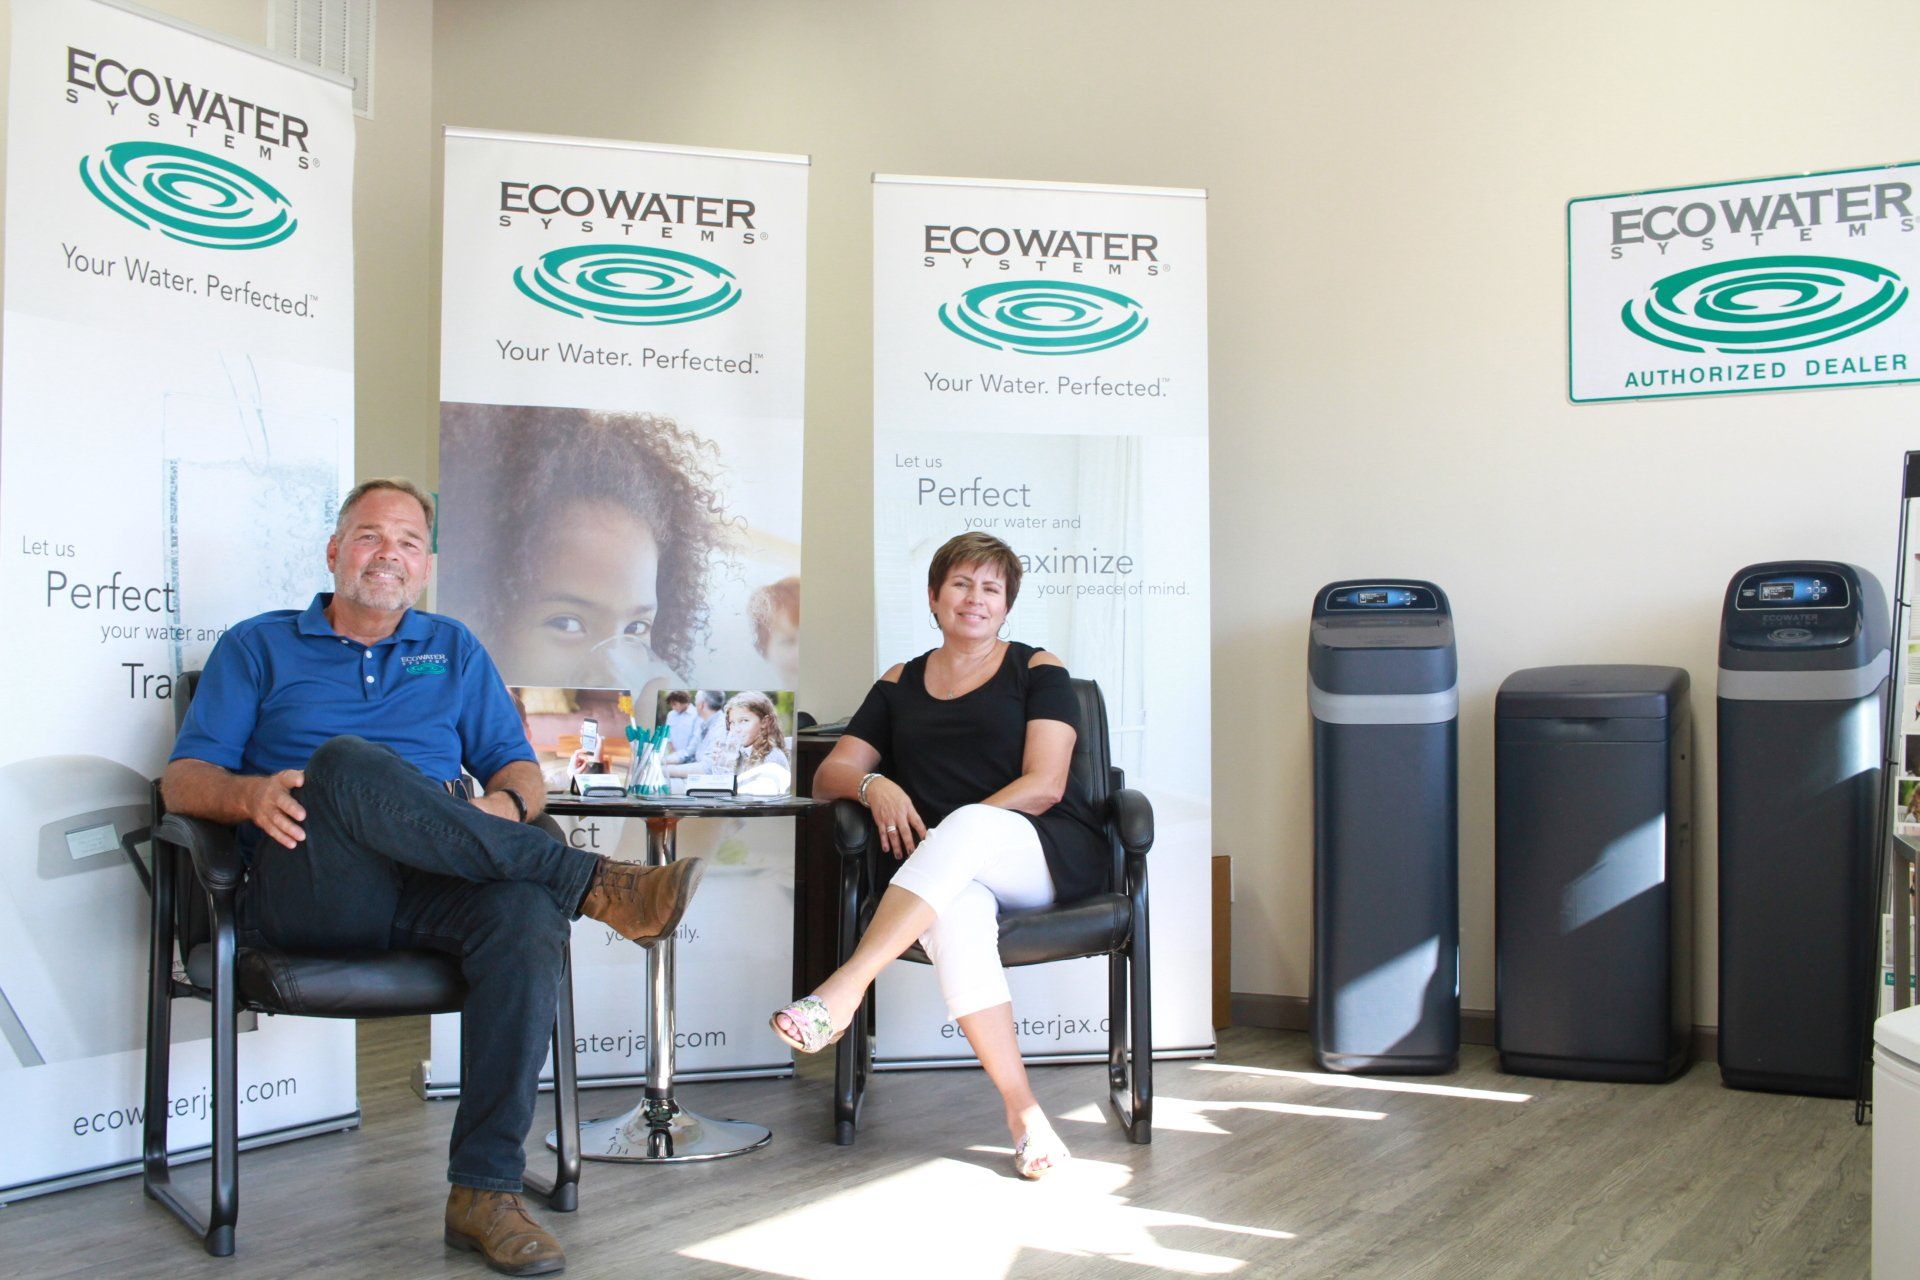 Tri -County EcoWater Systems — Business Owner in Fernandina Beach, FL